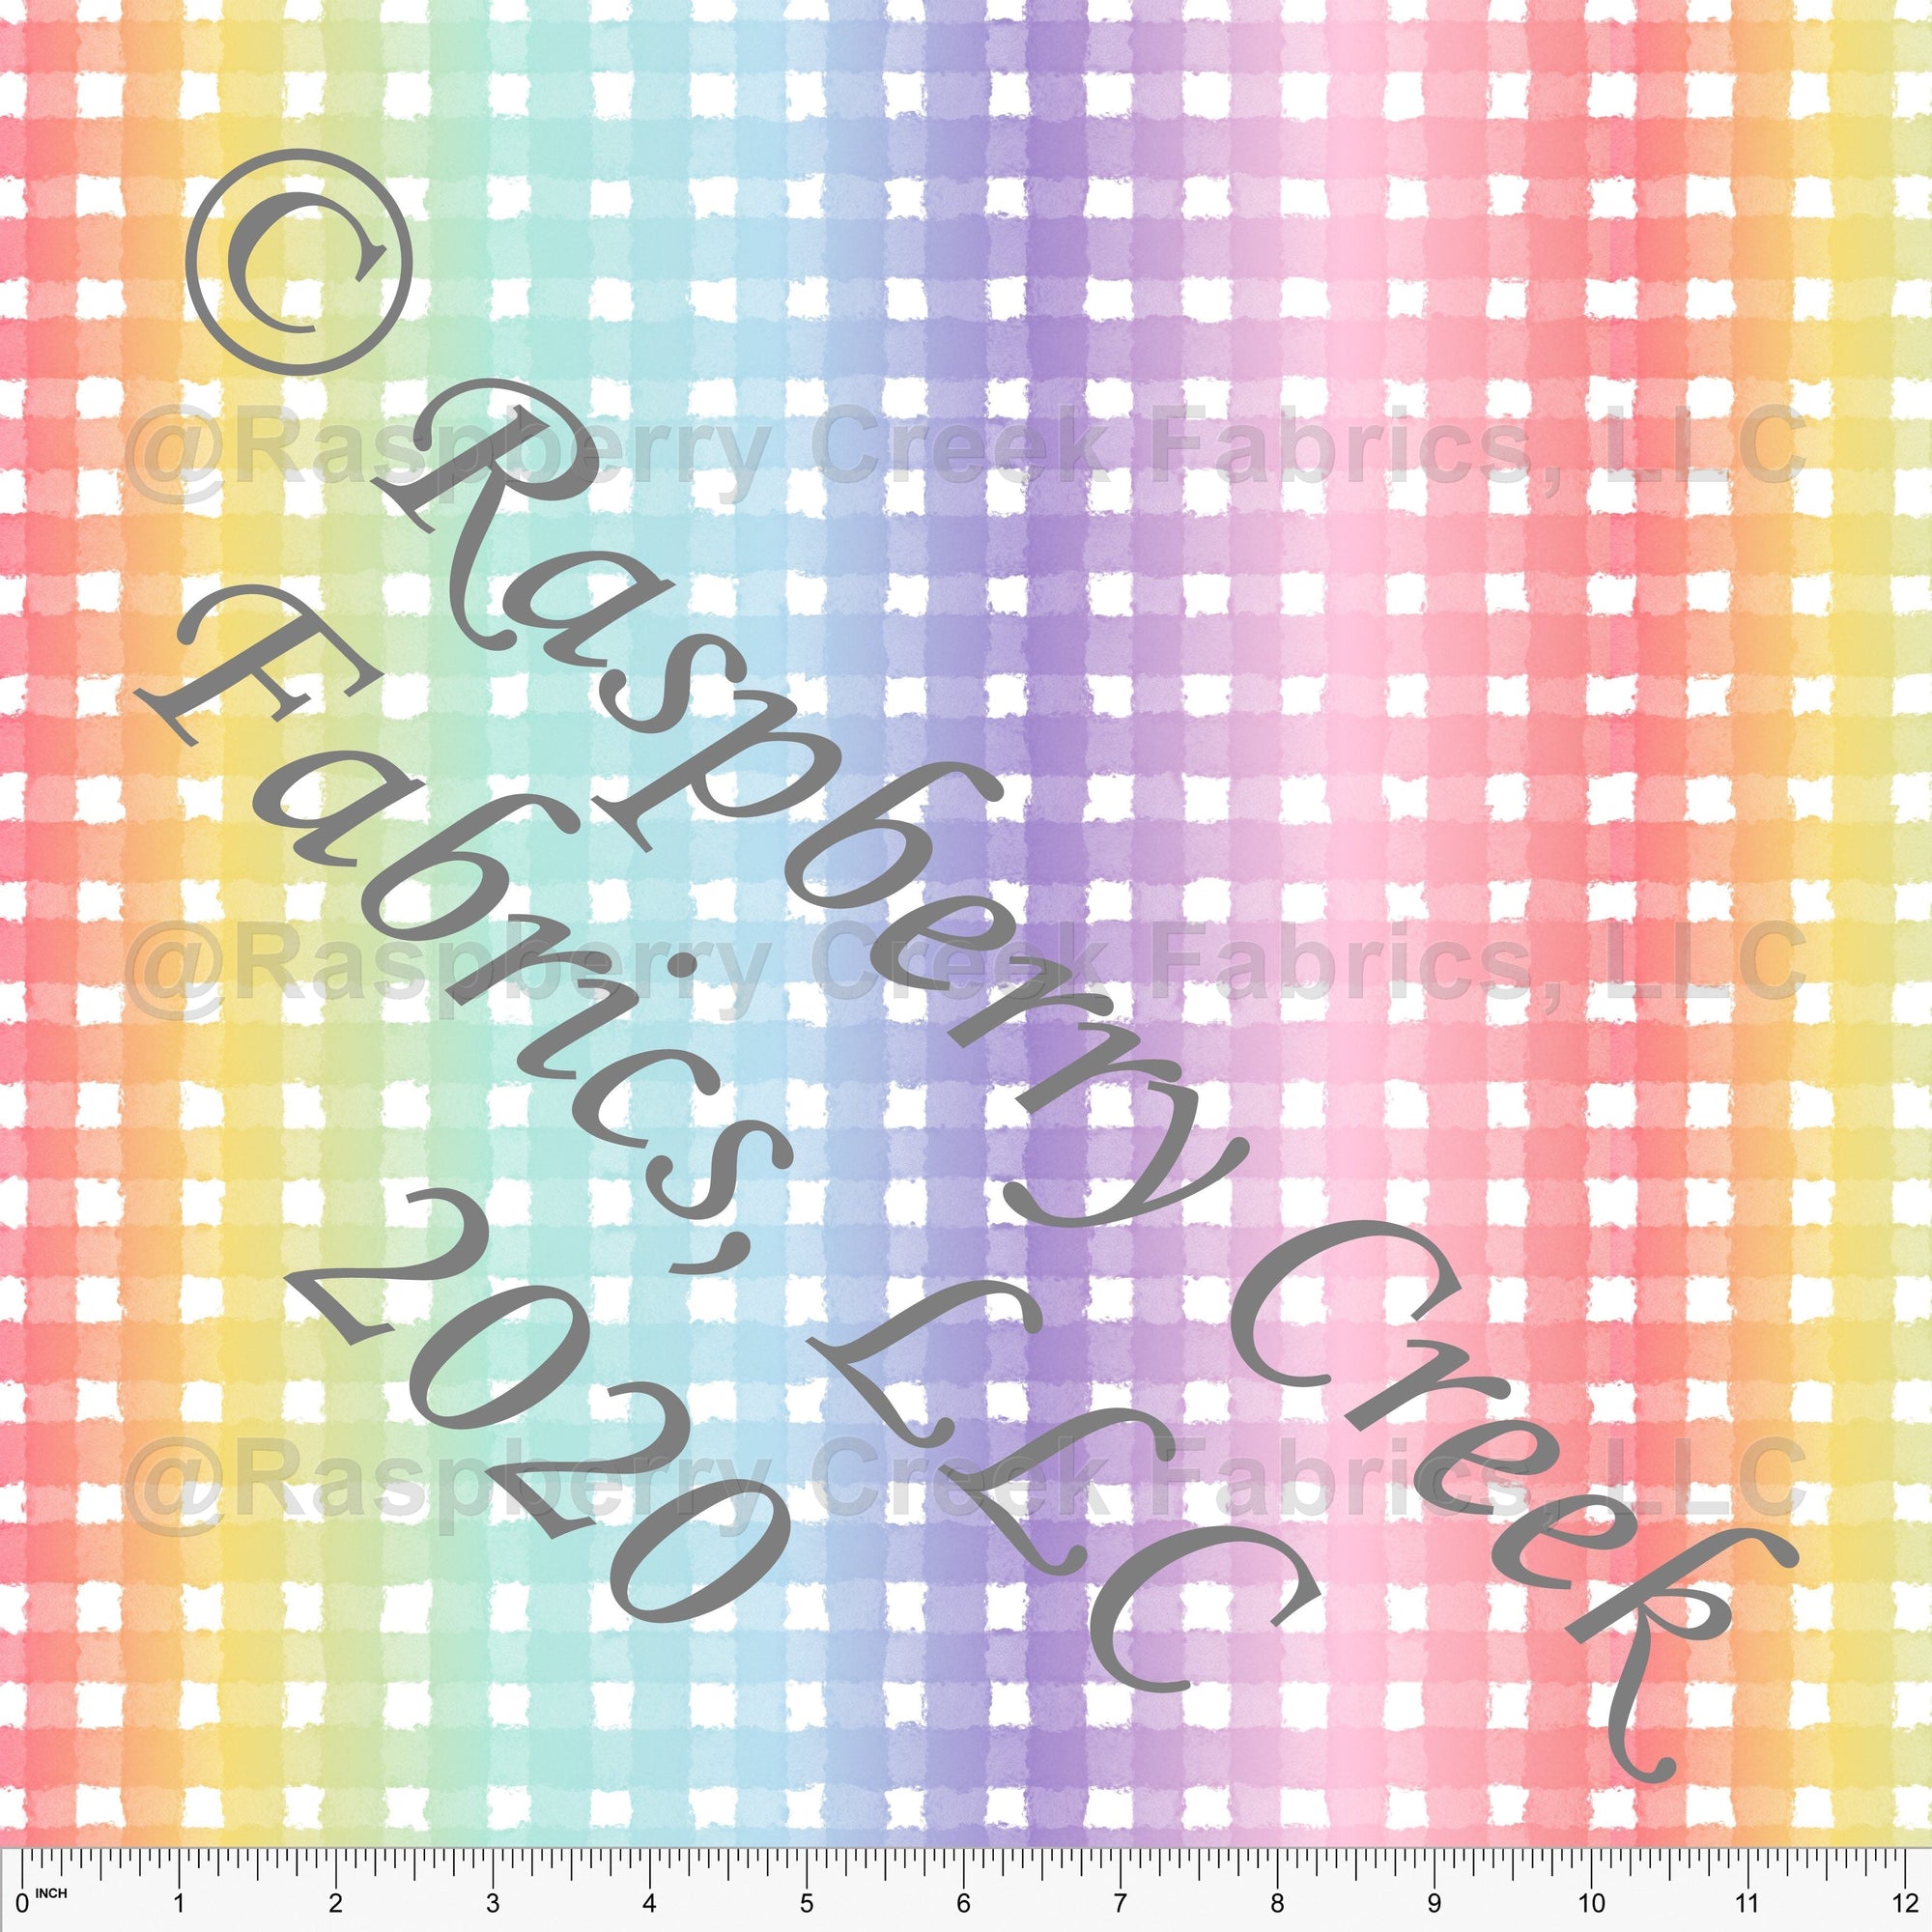 Blue Lilac Pink Yellow and Mint Rainbow and White Painted Check Gingham, By Bri Powell for Club Fabrics Fabric, Raspberry Creek Fabrics, watermarked